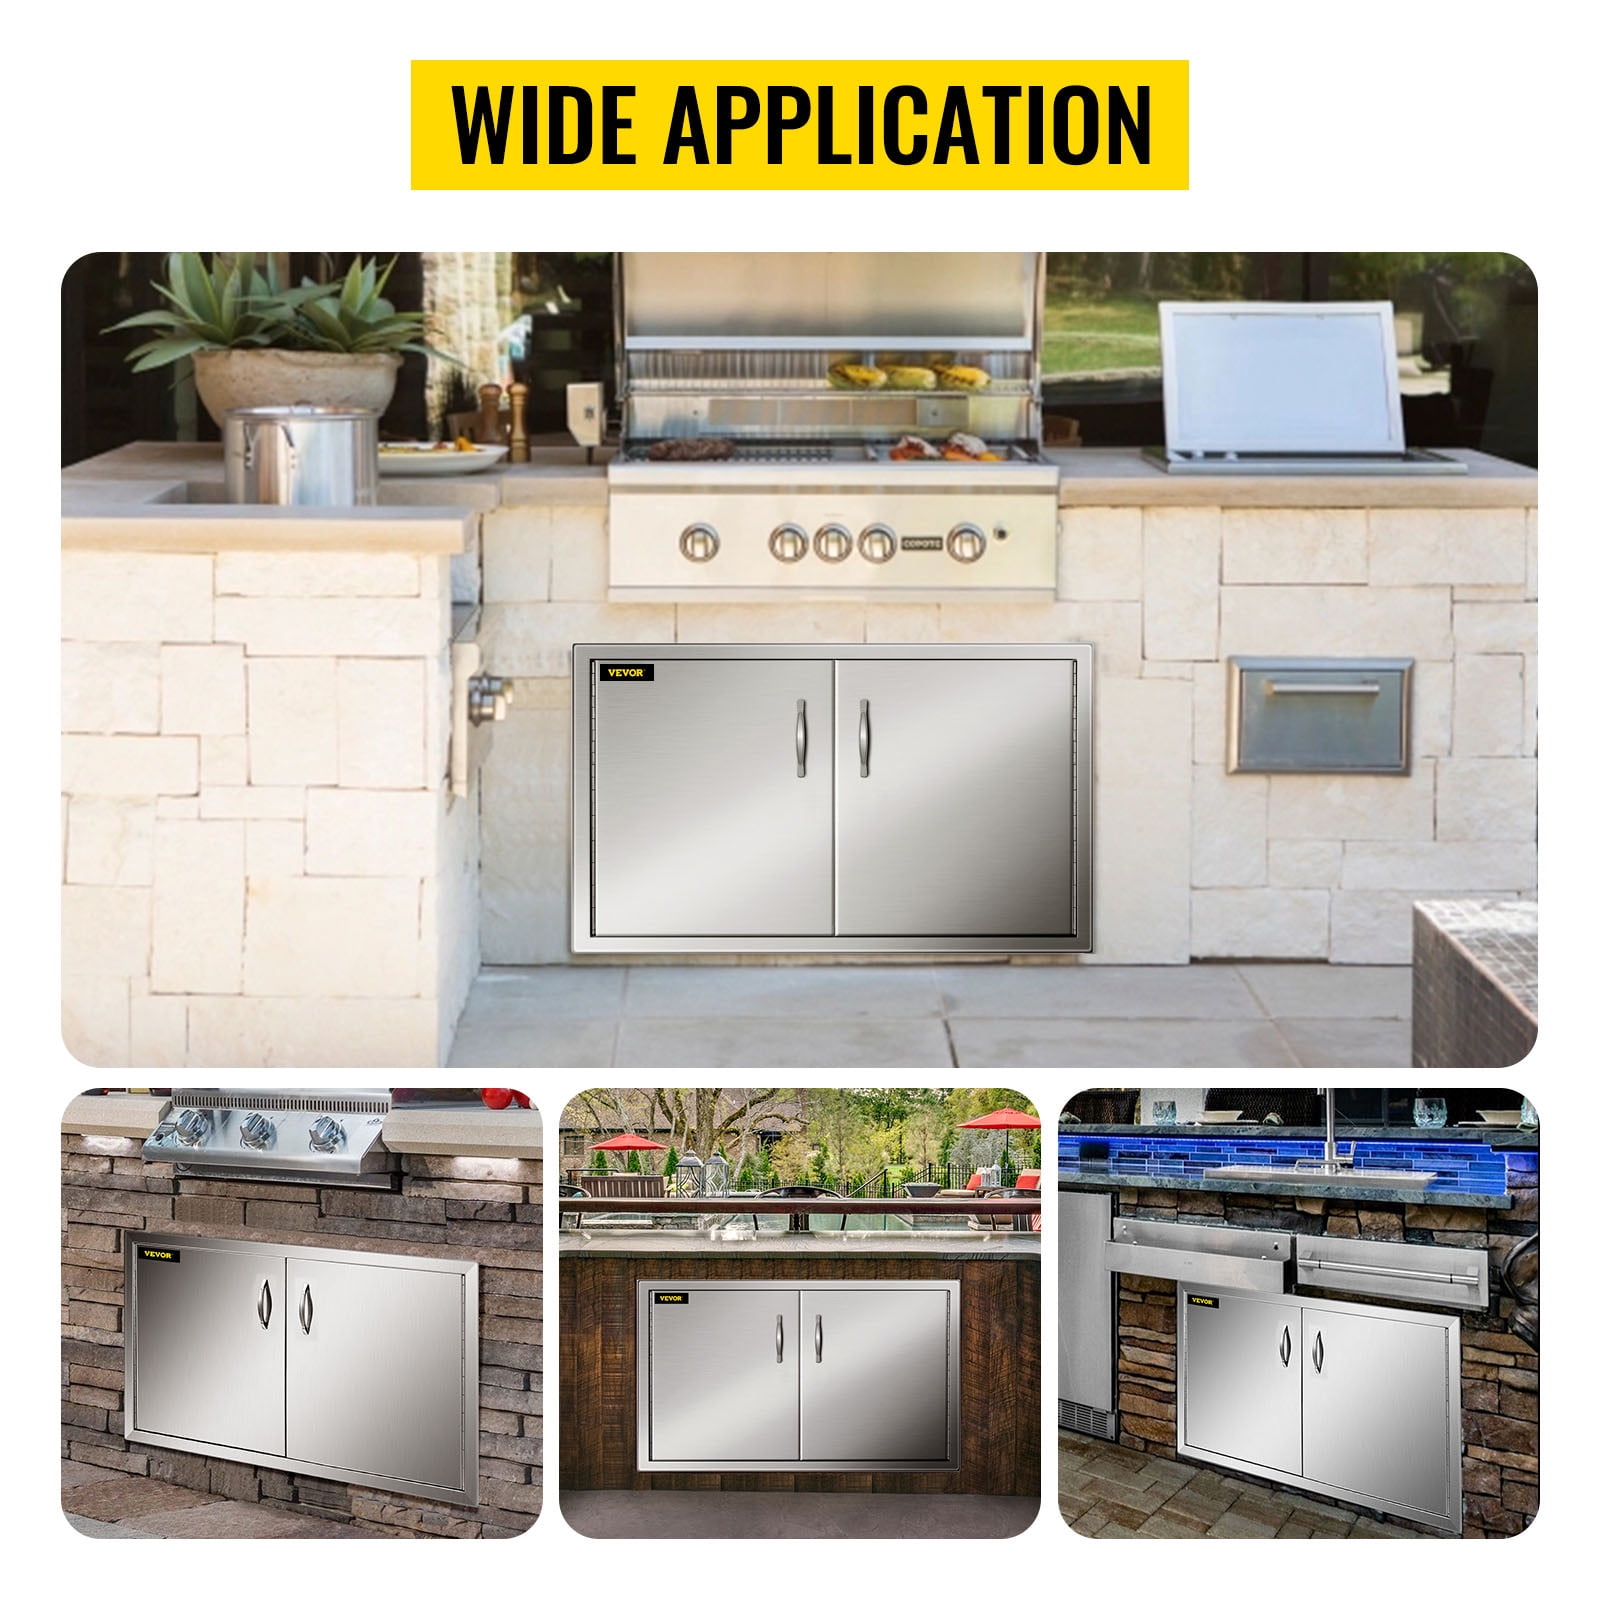 PRIBCHO Outdoor Kitchen Doors 28W x 19H BBQ Access Door Wall Construction Stainless Steel Door for Outdoor Kitchen Grilling Station or Commercial BBQ Island 